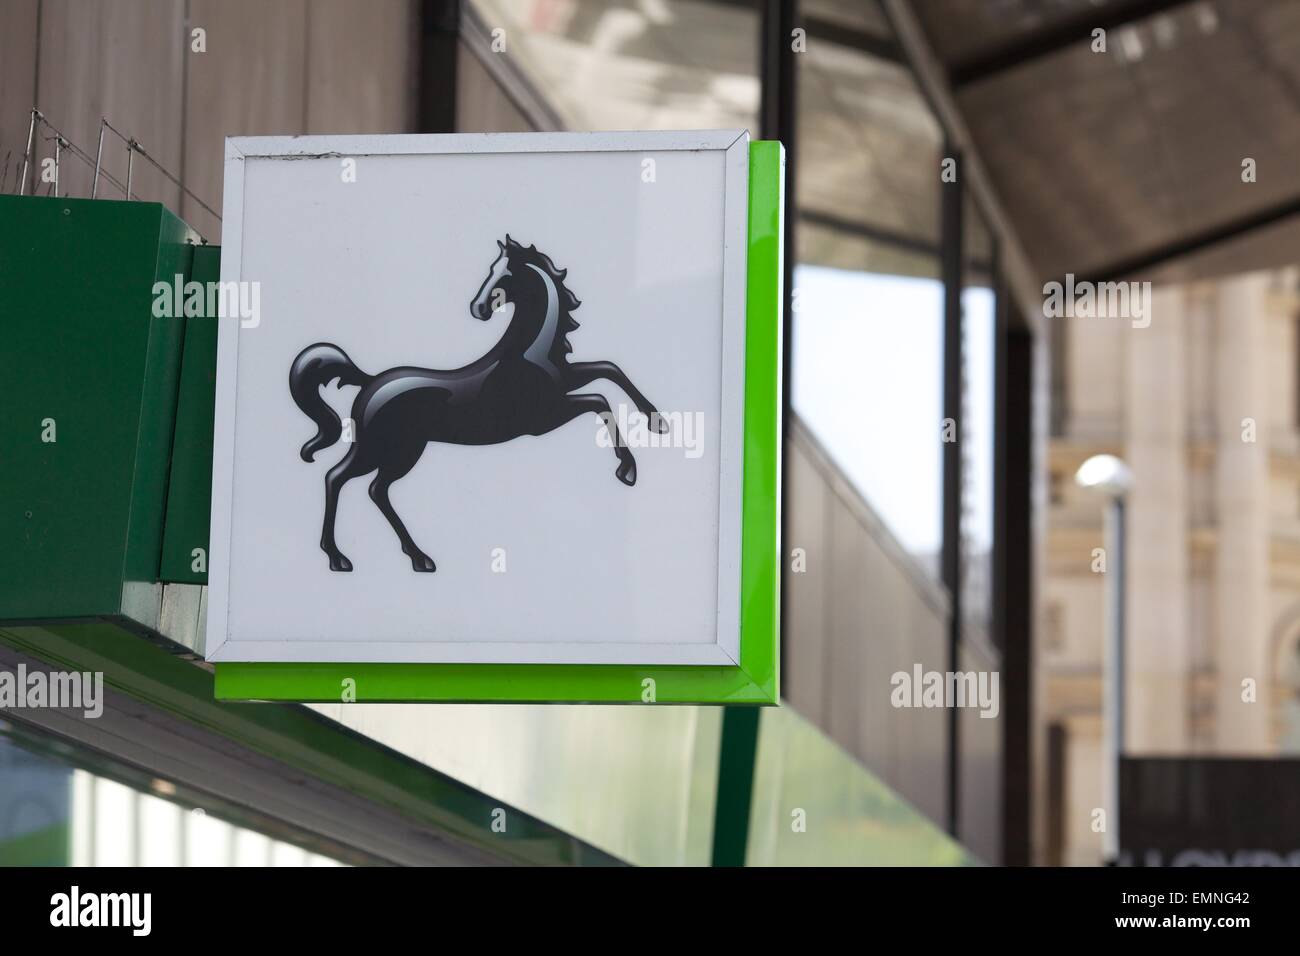 Lloyds Bank signage outside bank building in Leeds city centre Stock Photo